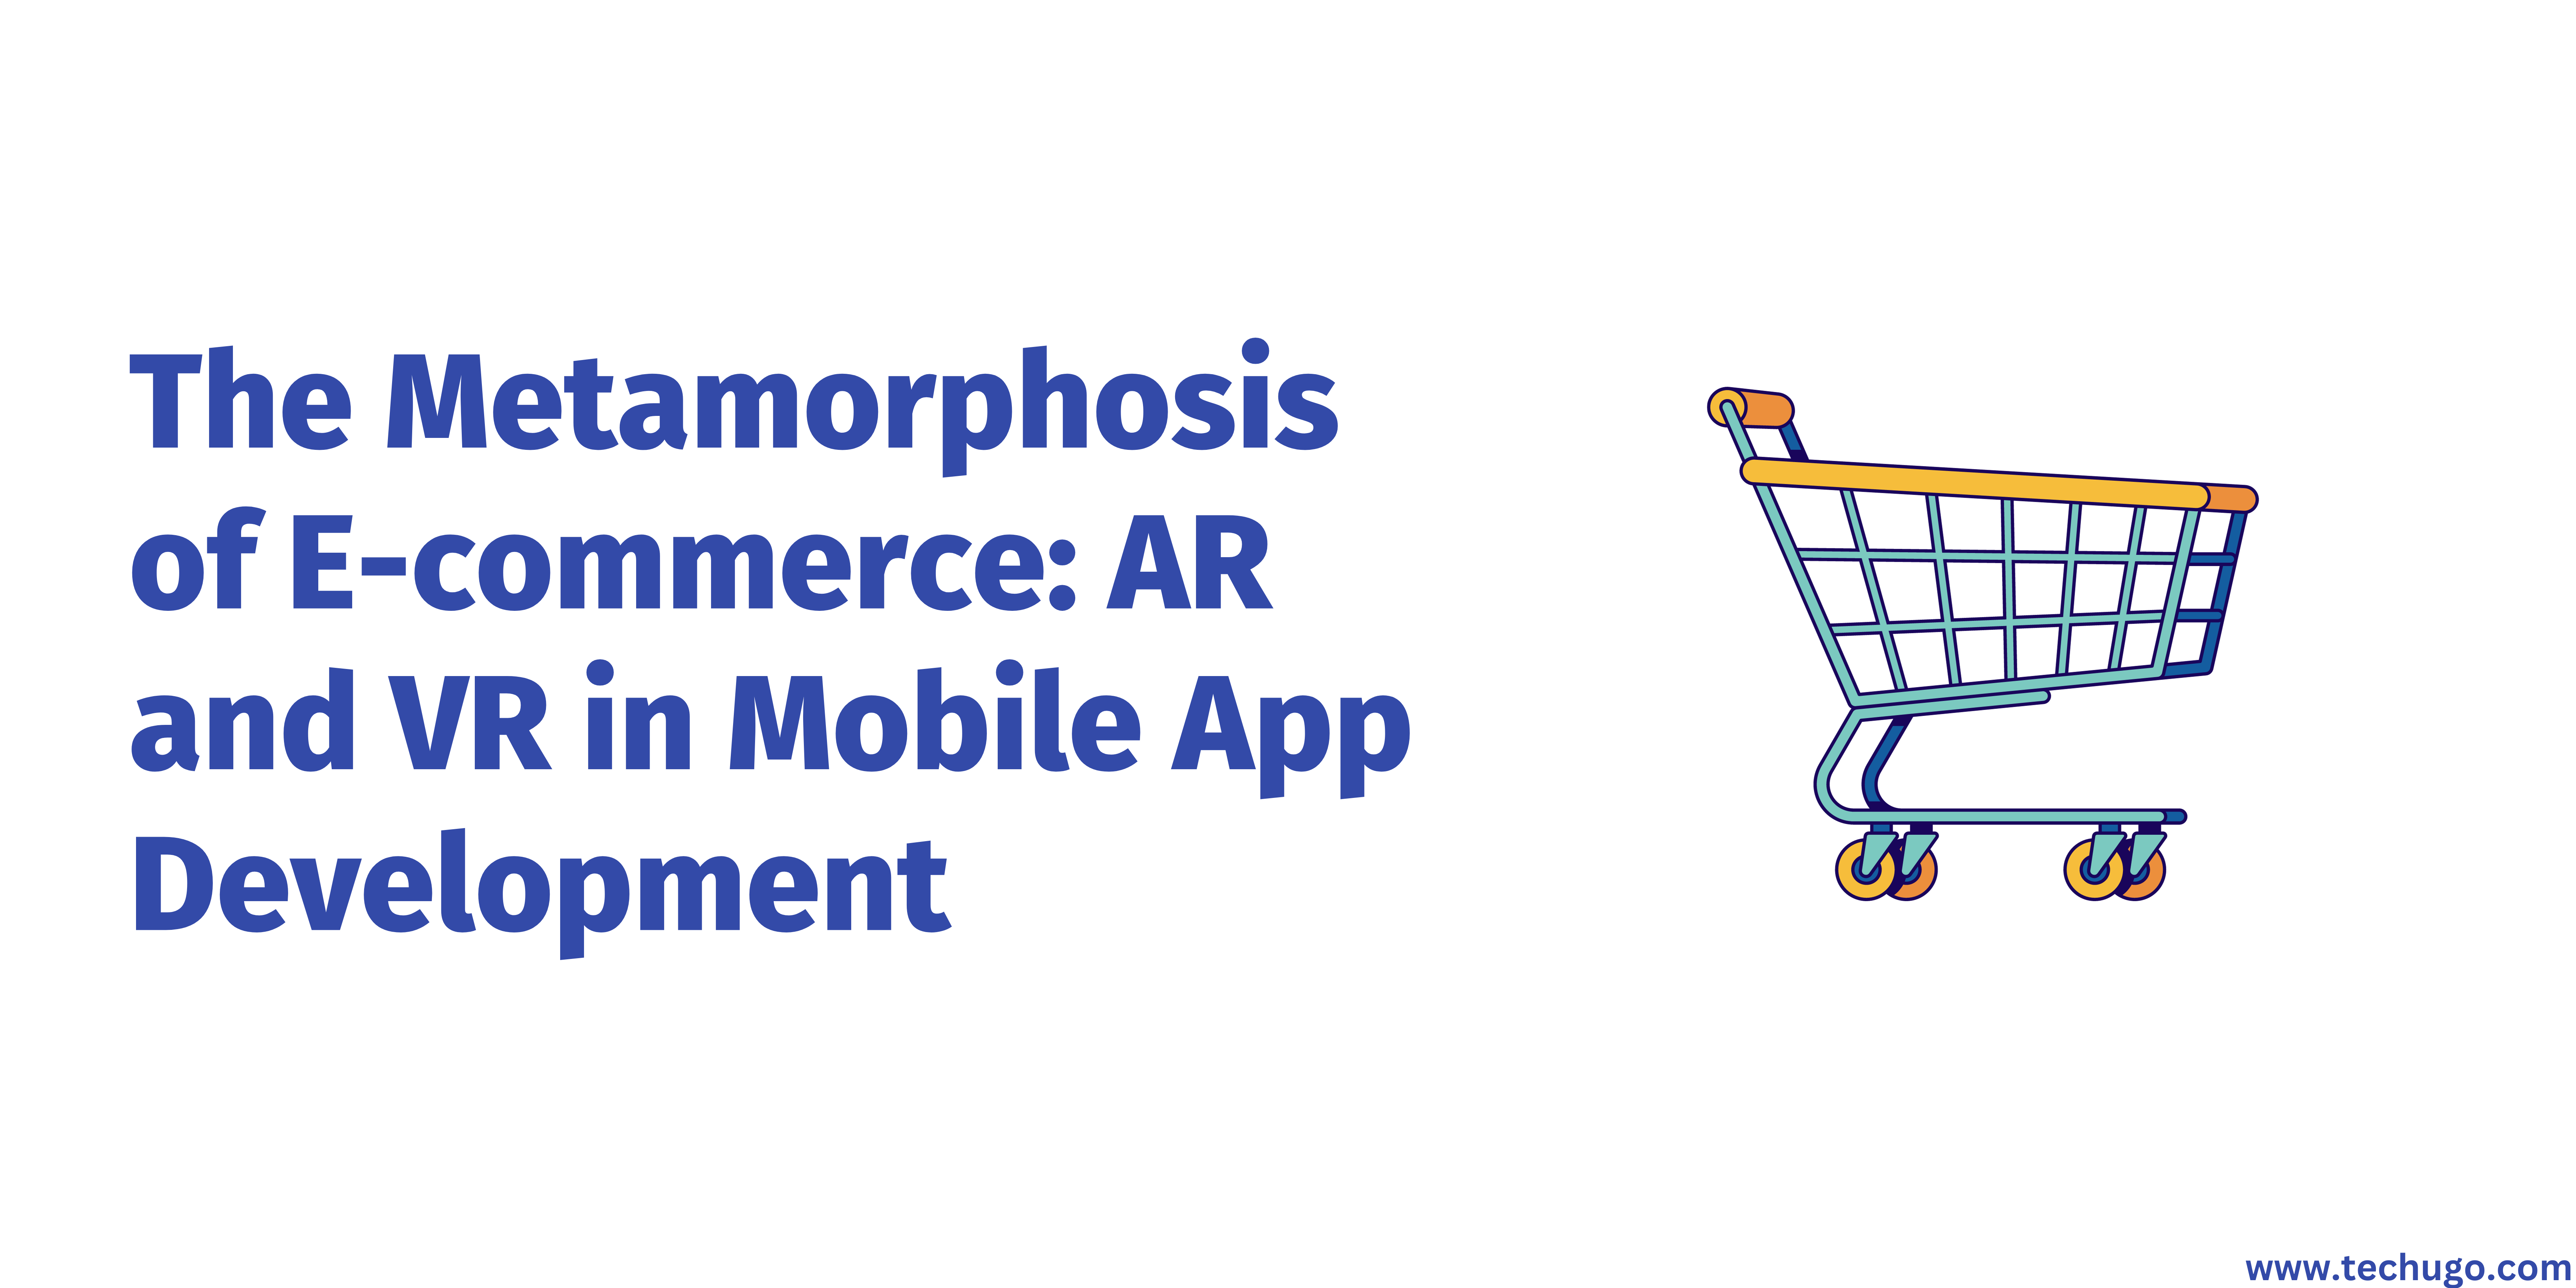 The Metamorphosis of E-commerce: AR and VR in Mobile App Development